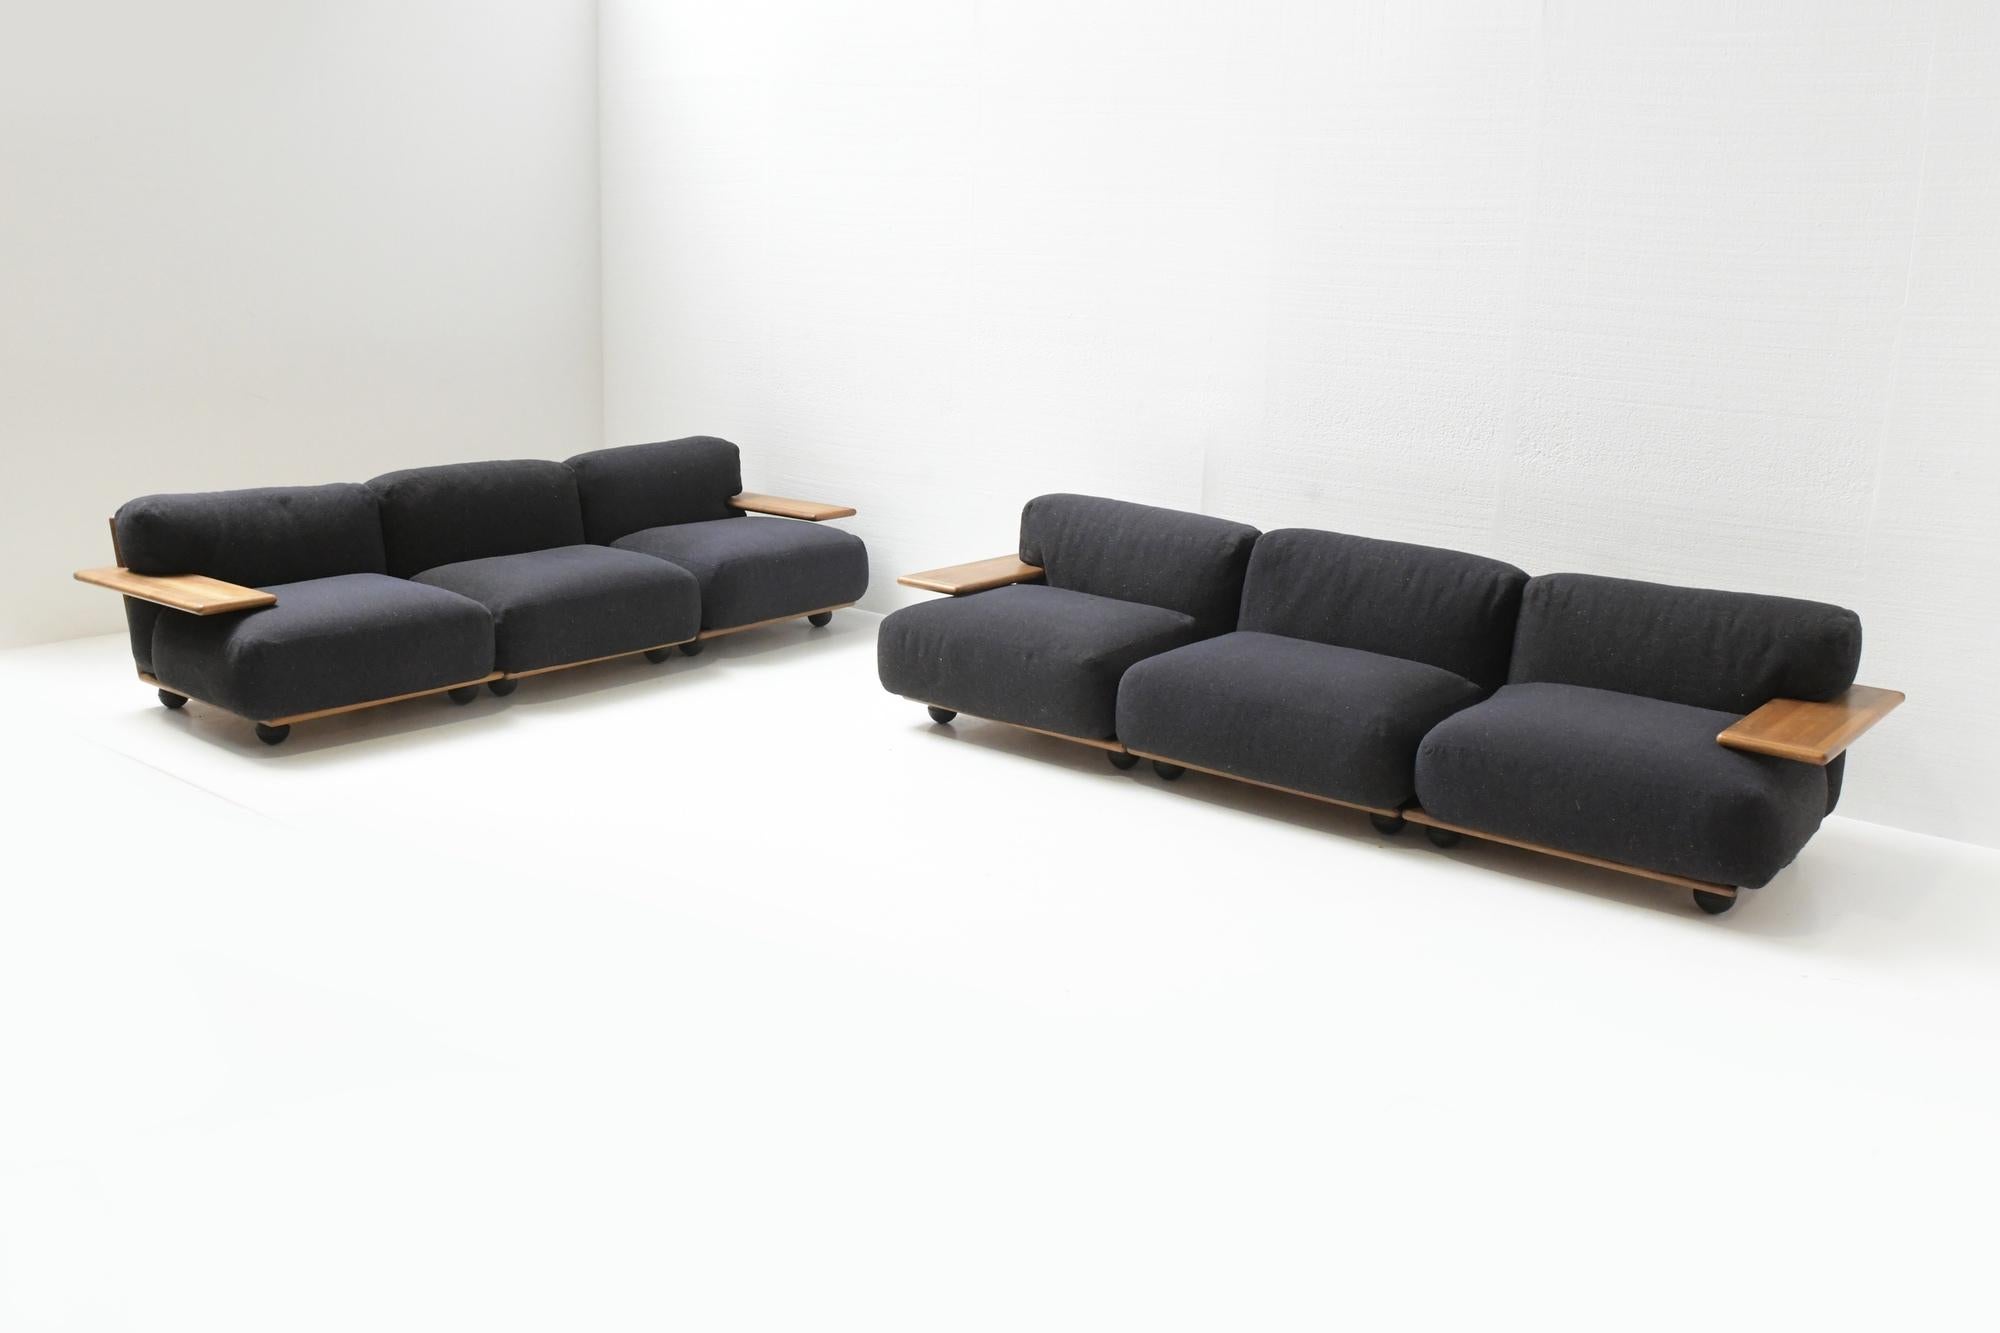 Stunning Modular Pianura Seating Group by Mario Bellini for Cassina Italy 7